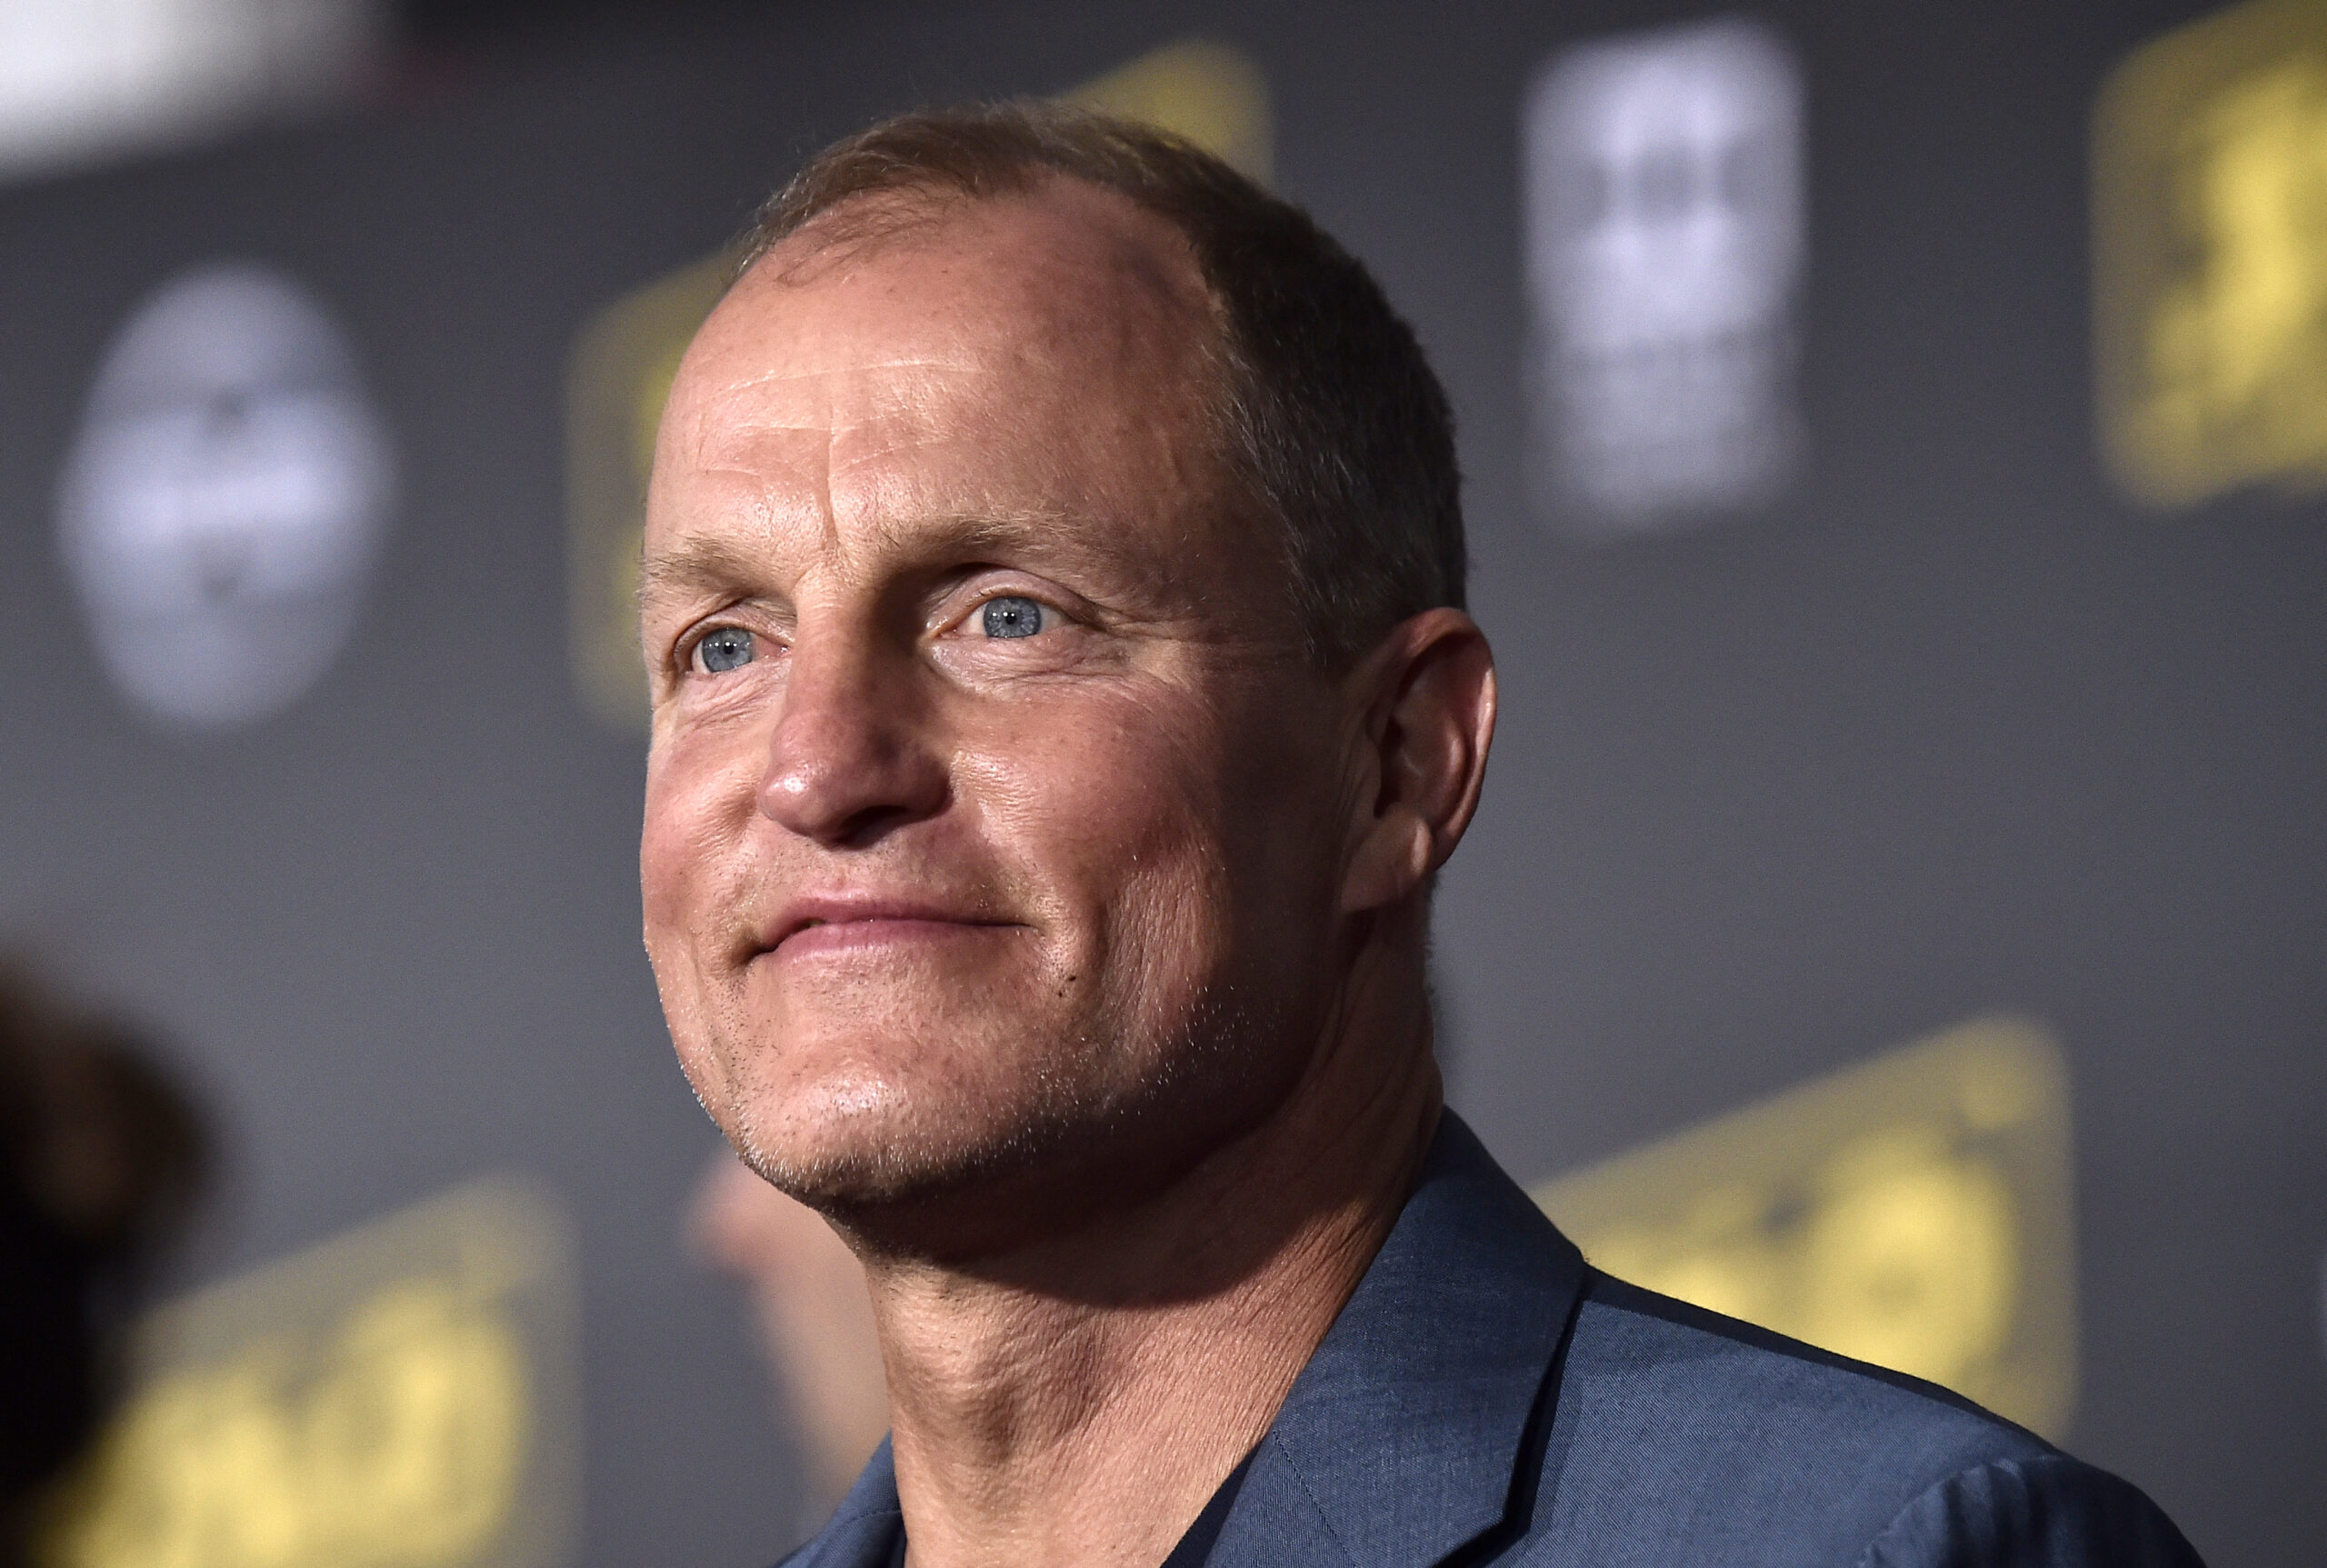 Woody Harrelson unfazed by ‘SNL’ backlash, ignores criticism.